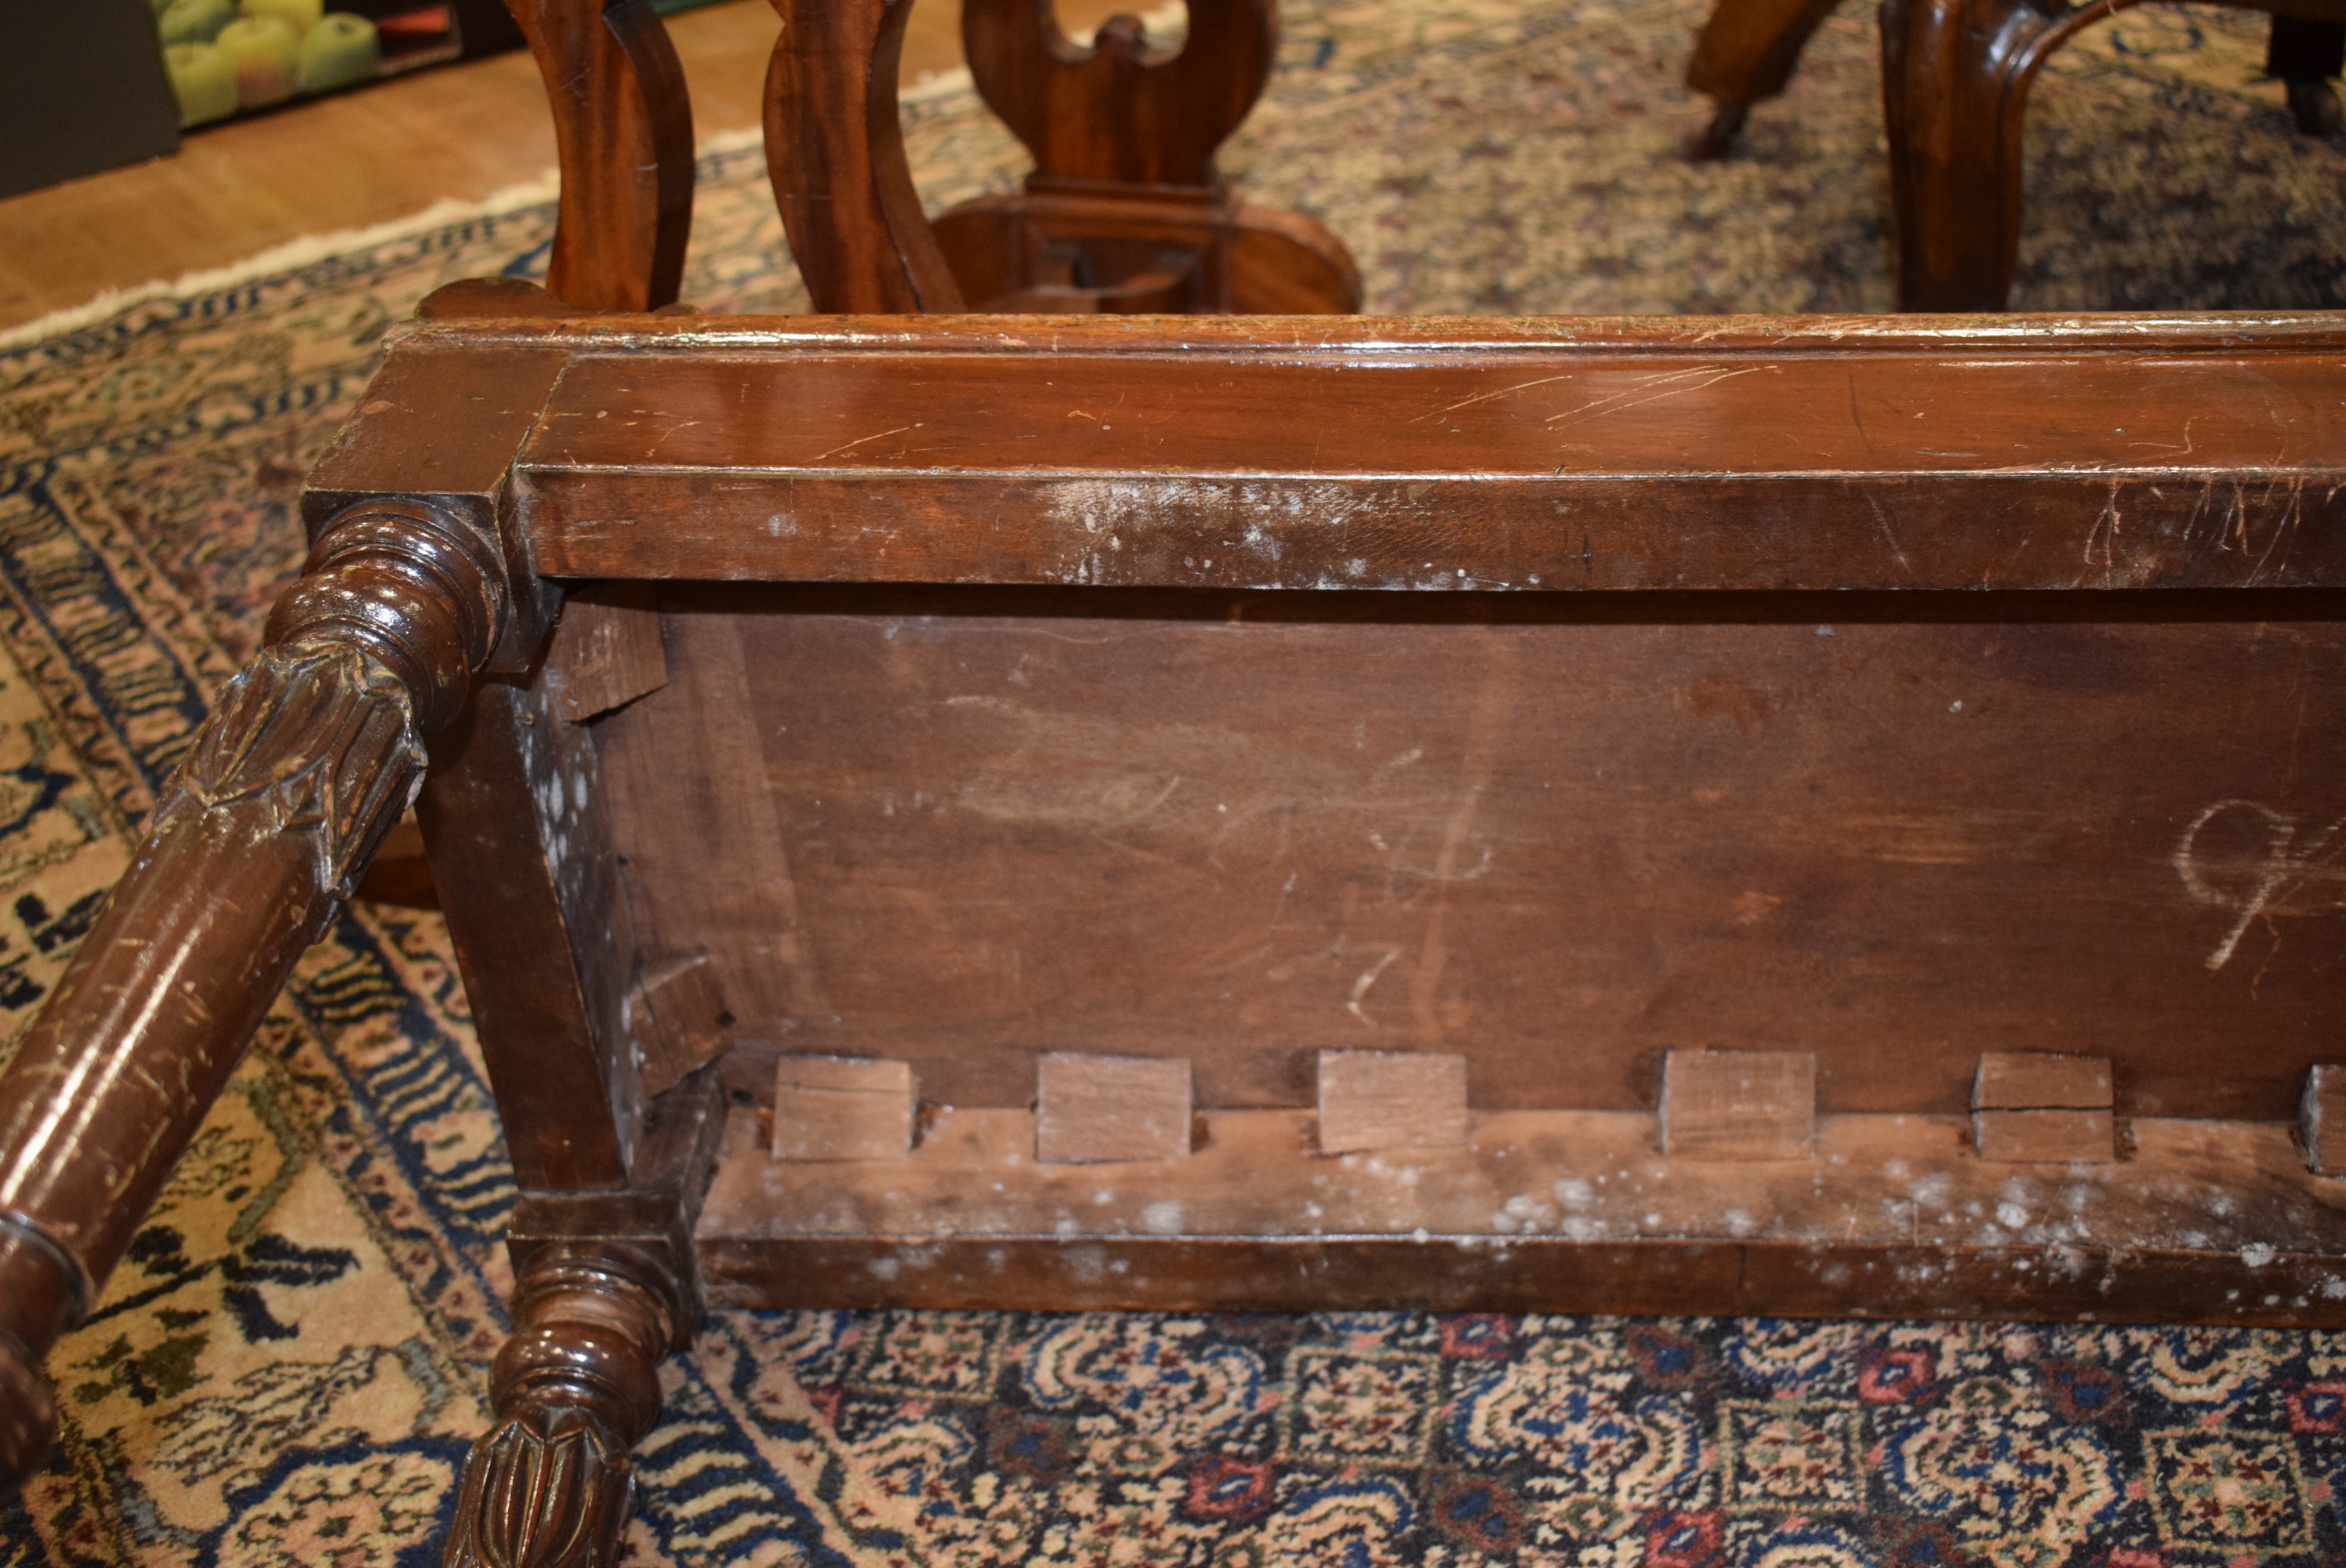 A late 19th century mahogany window seat with scrolled ends and turned legs with acanthus-leaf caps - Image 7 of 20